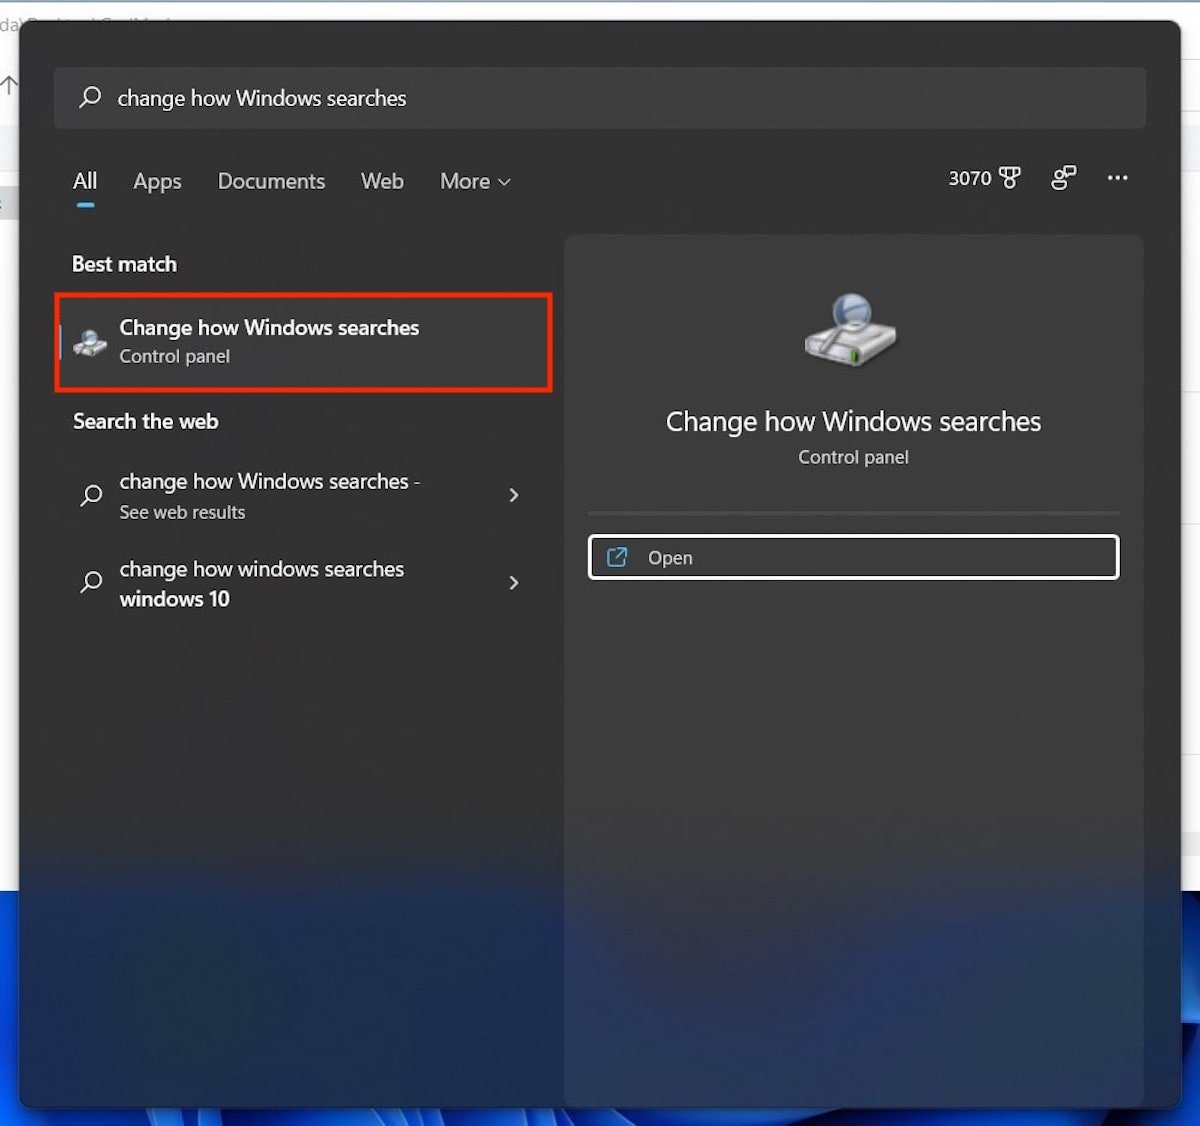 Identical option for Windows 11 search